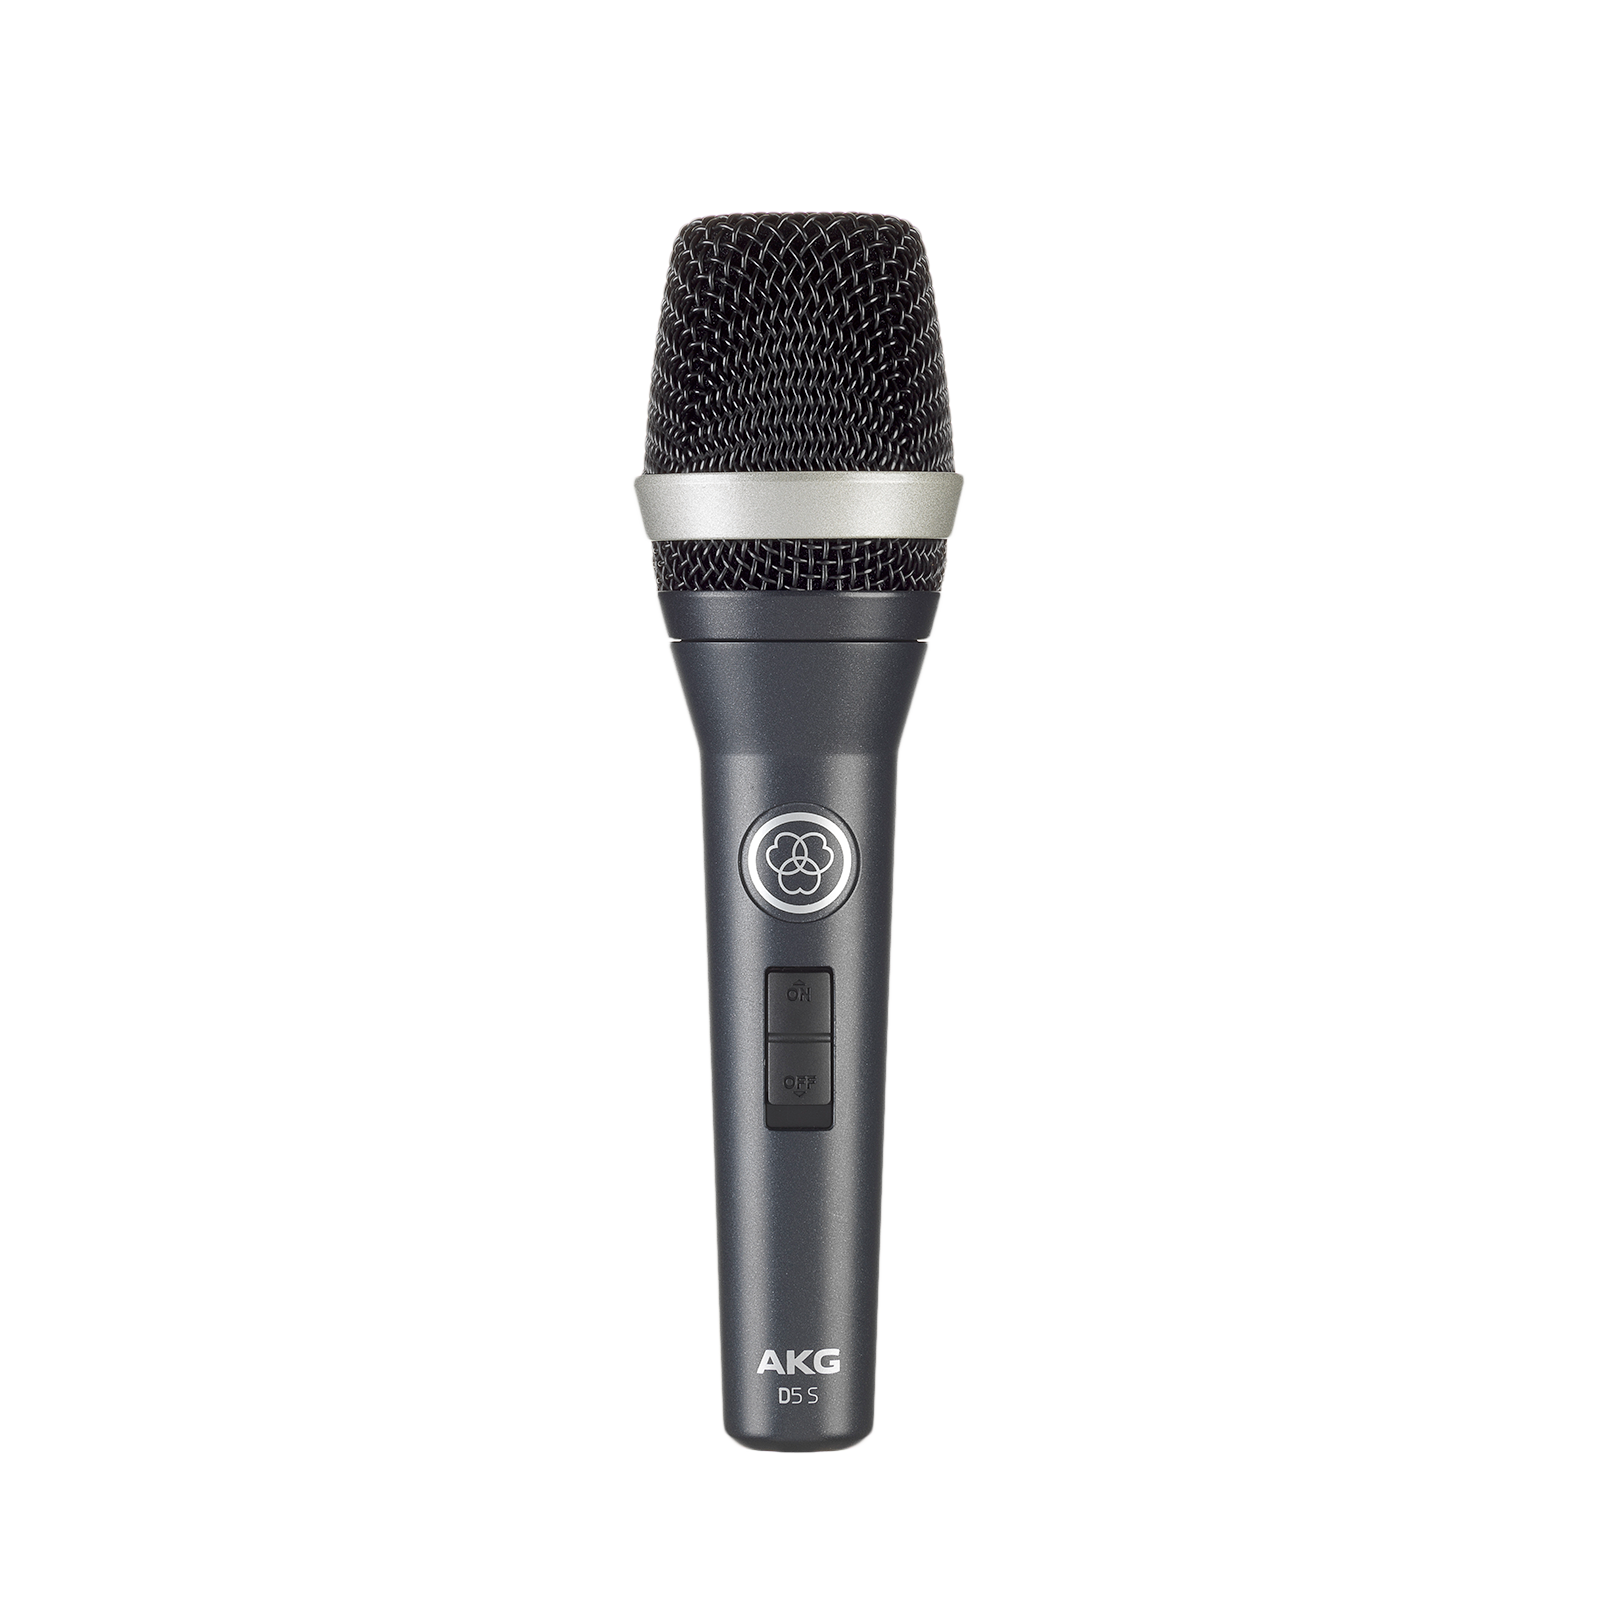 AKG Pro Audio D5S Professional Dynamic Vocal Microphone for Lead and Backing Vocals - 305broadcast